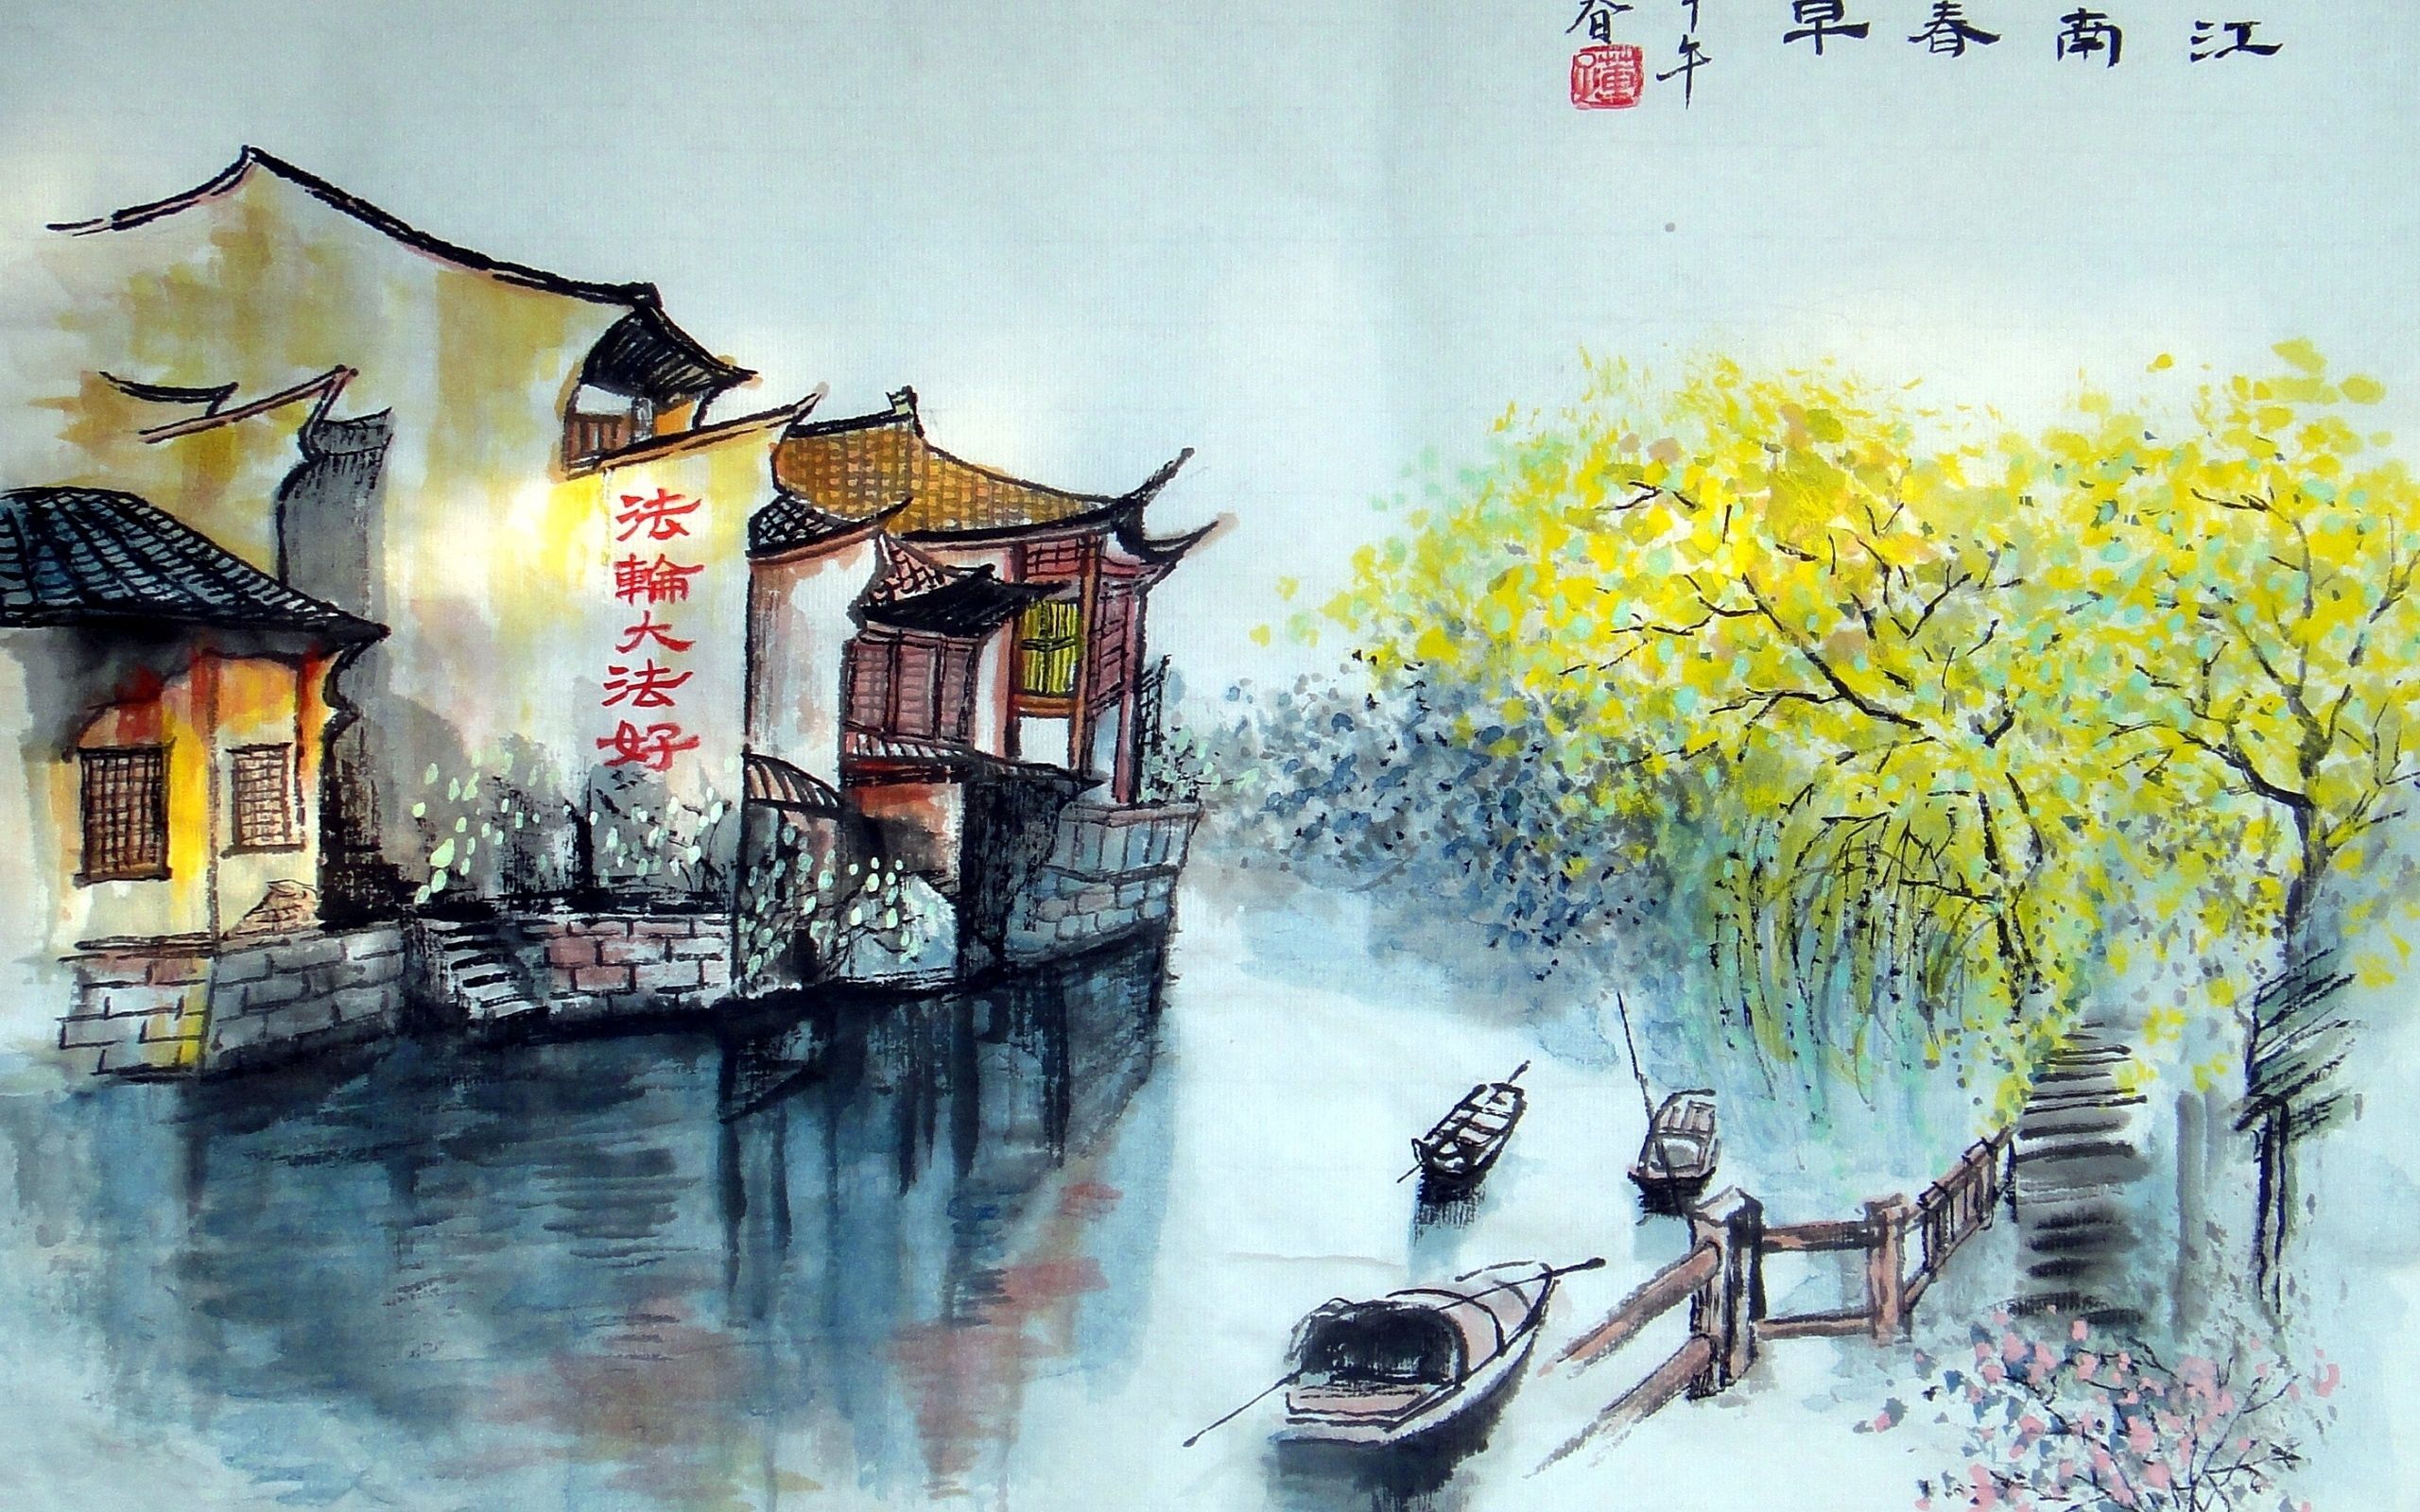 Chinese Painting Wallpaper Free .wallpaperaccess.com